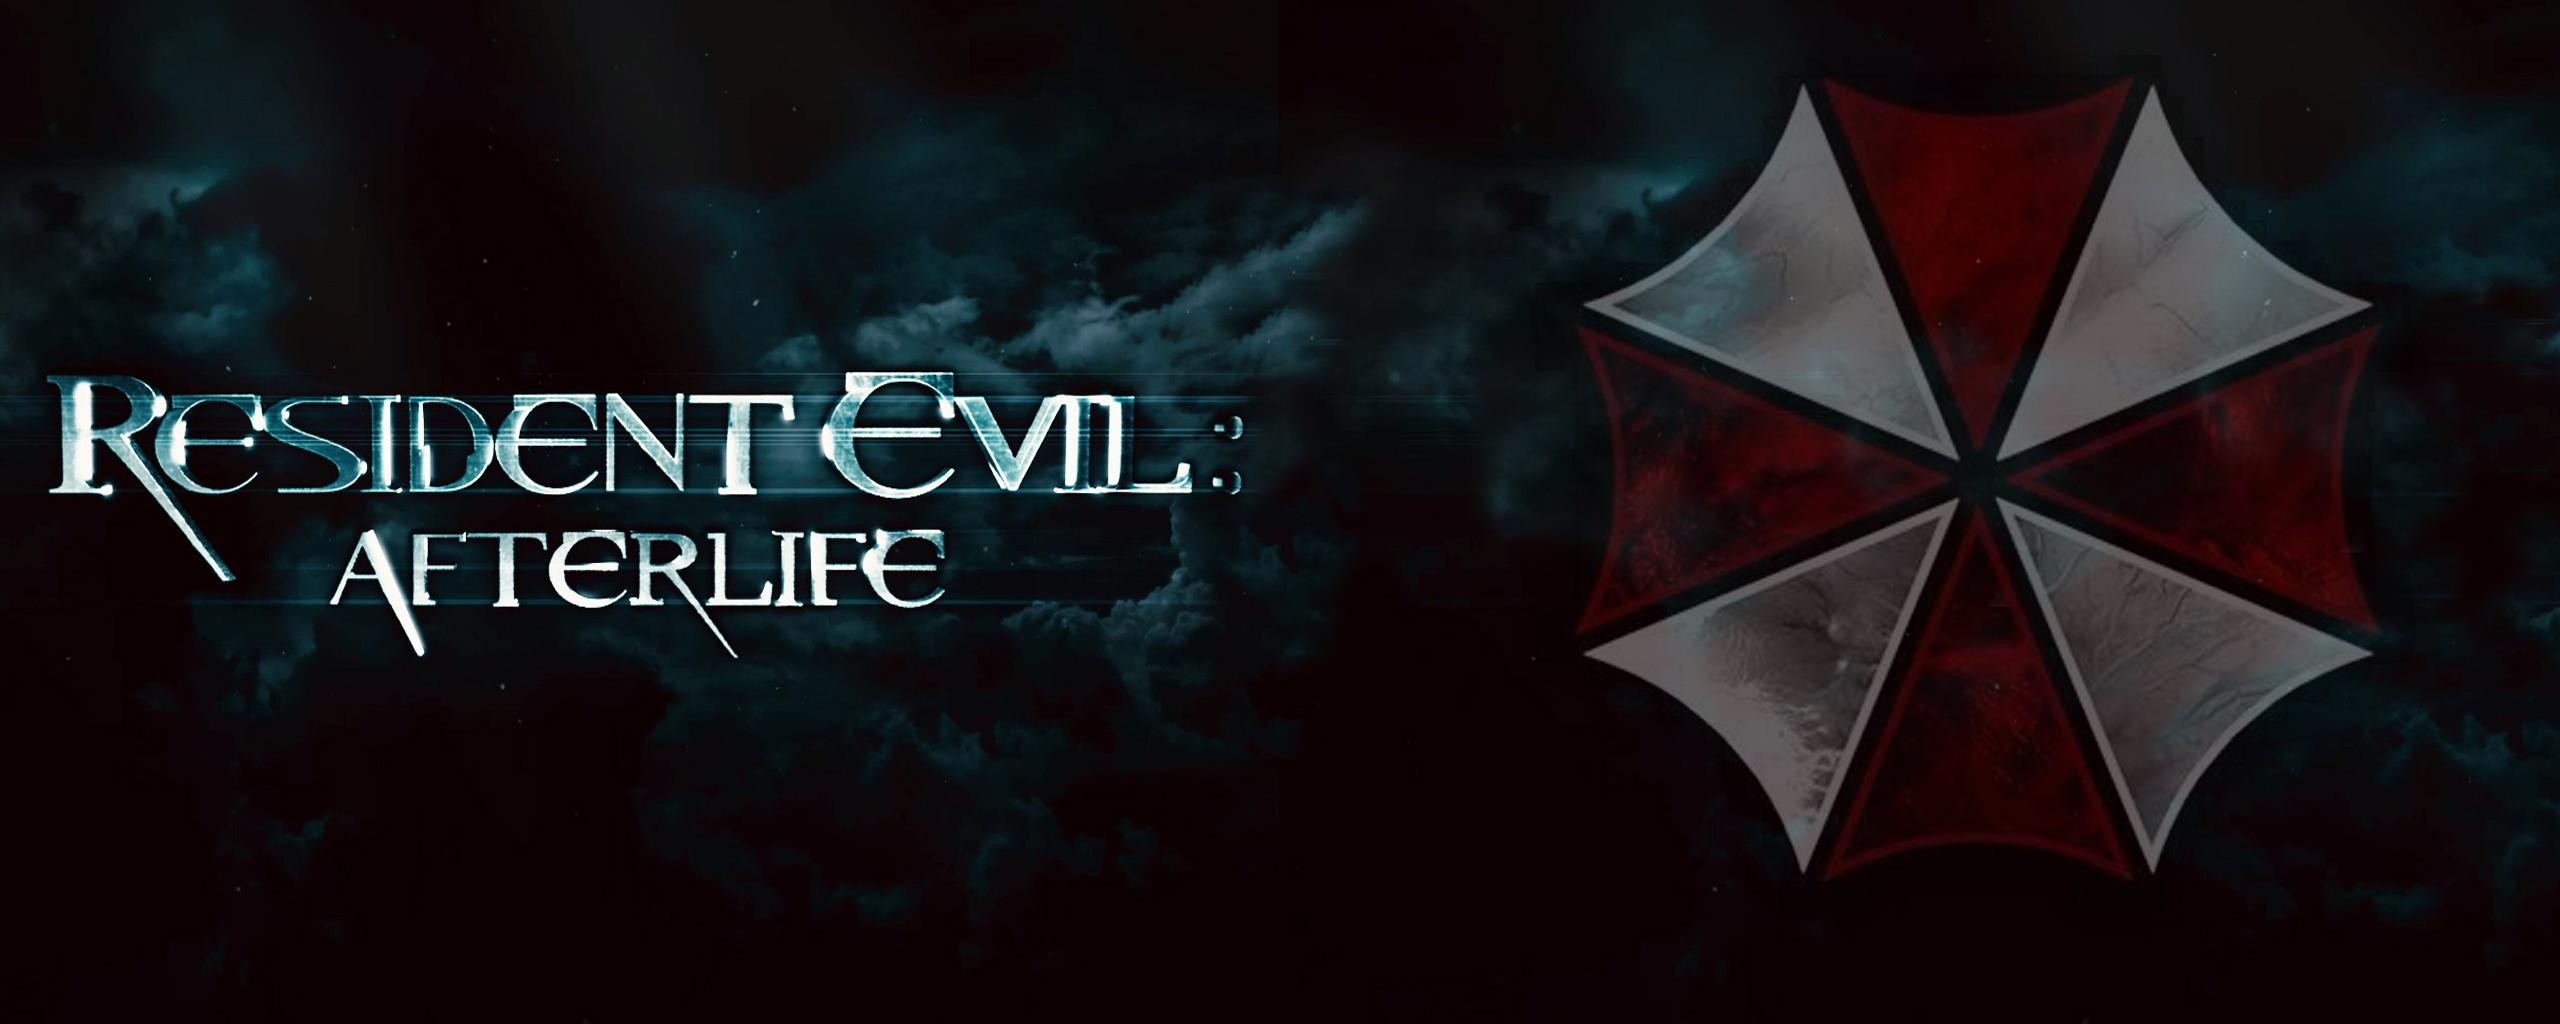 Resident Evil Afterlife Movies Umbrella Corporation 2560x1024